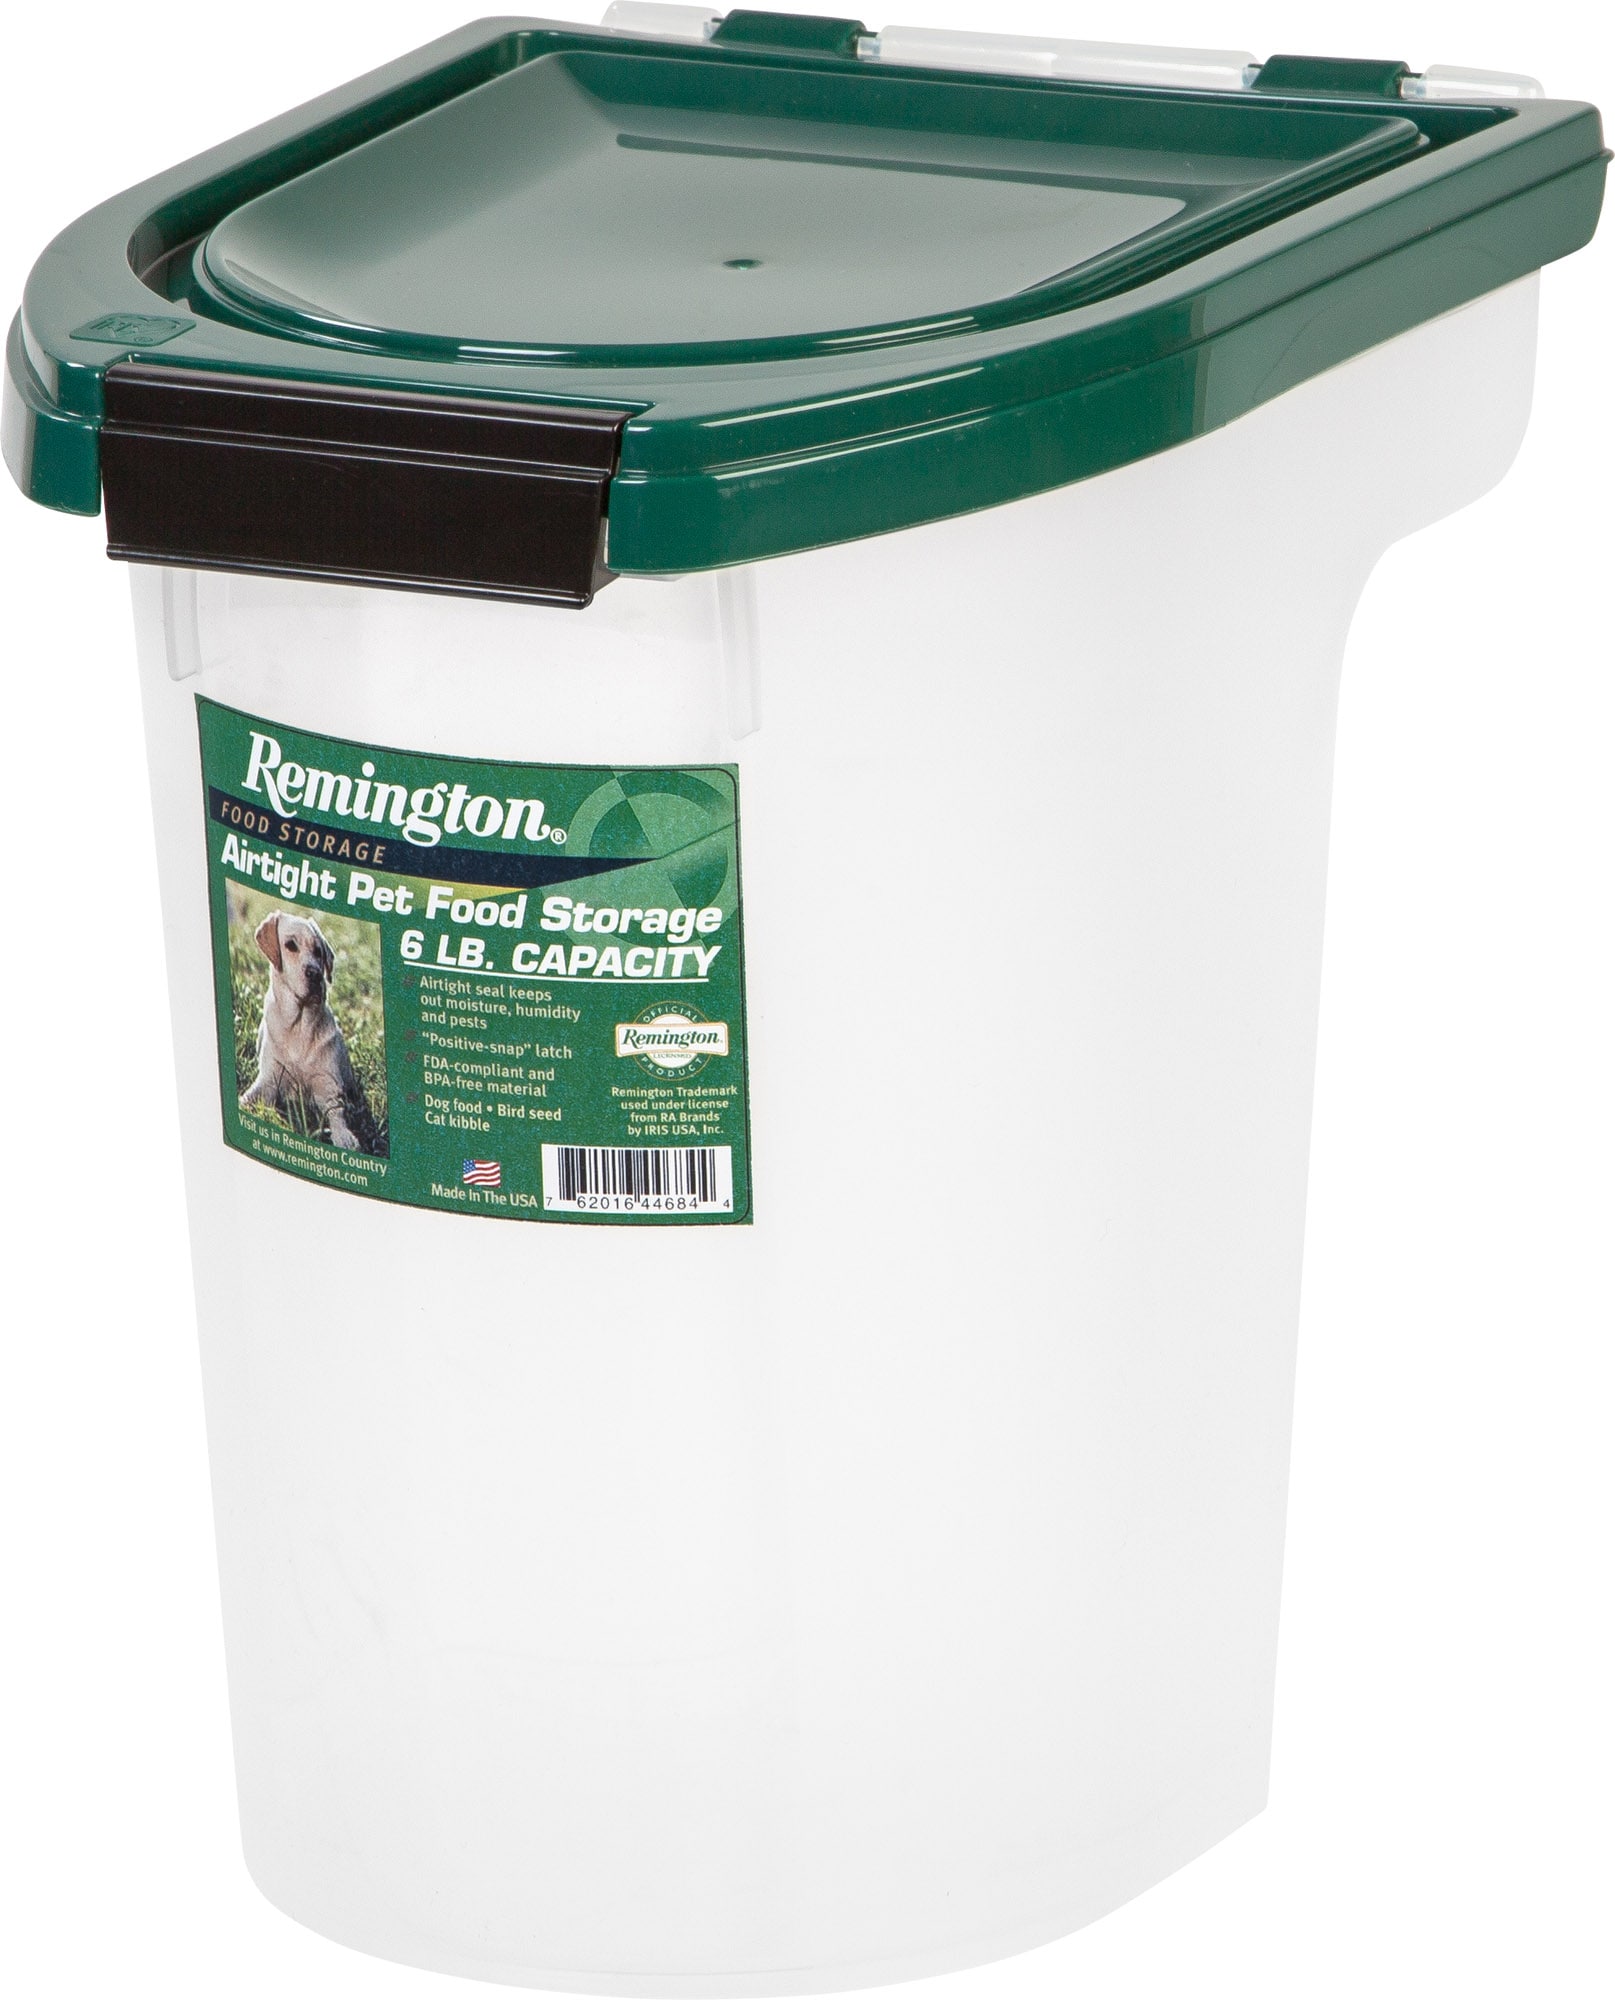 are plastic dog food containers safe